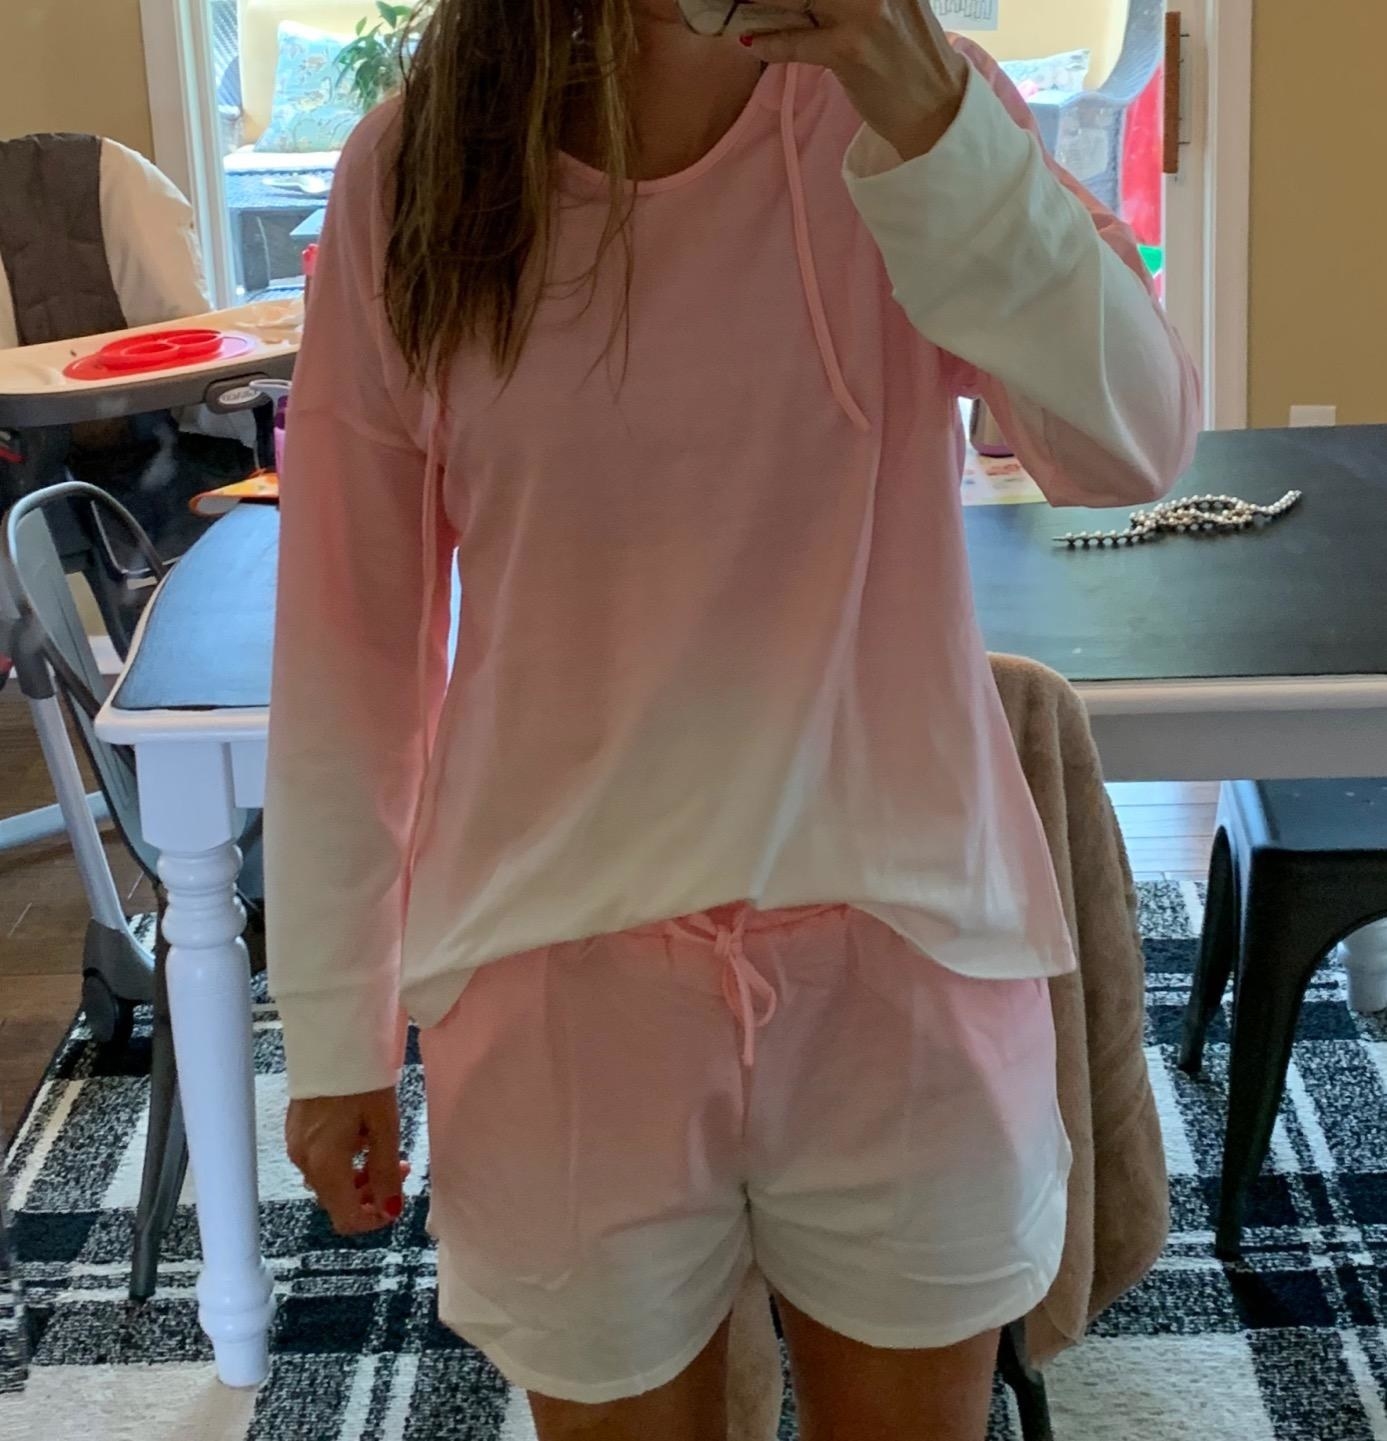 Reviewer is wearing a pink and white gradient short and long sleeve loungewear set